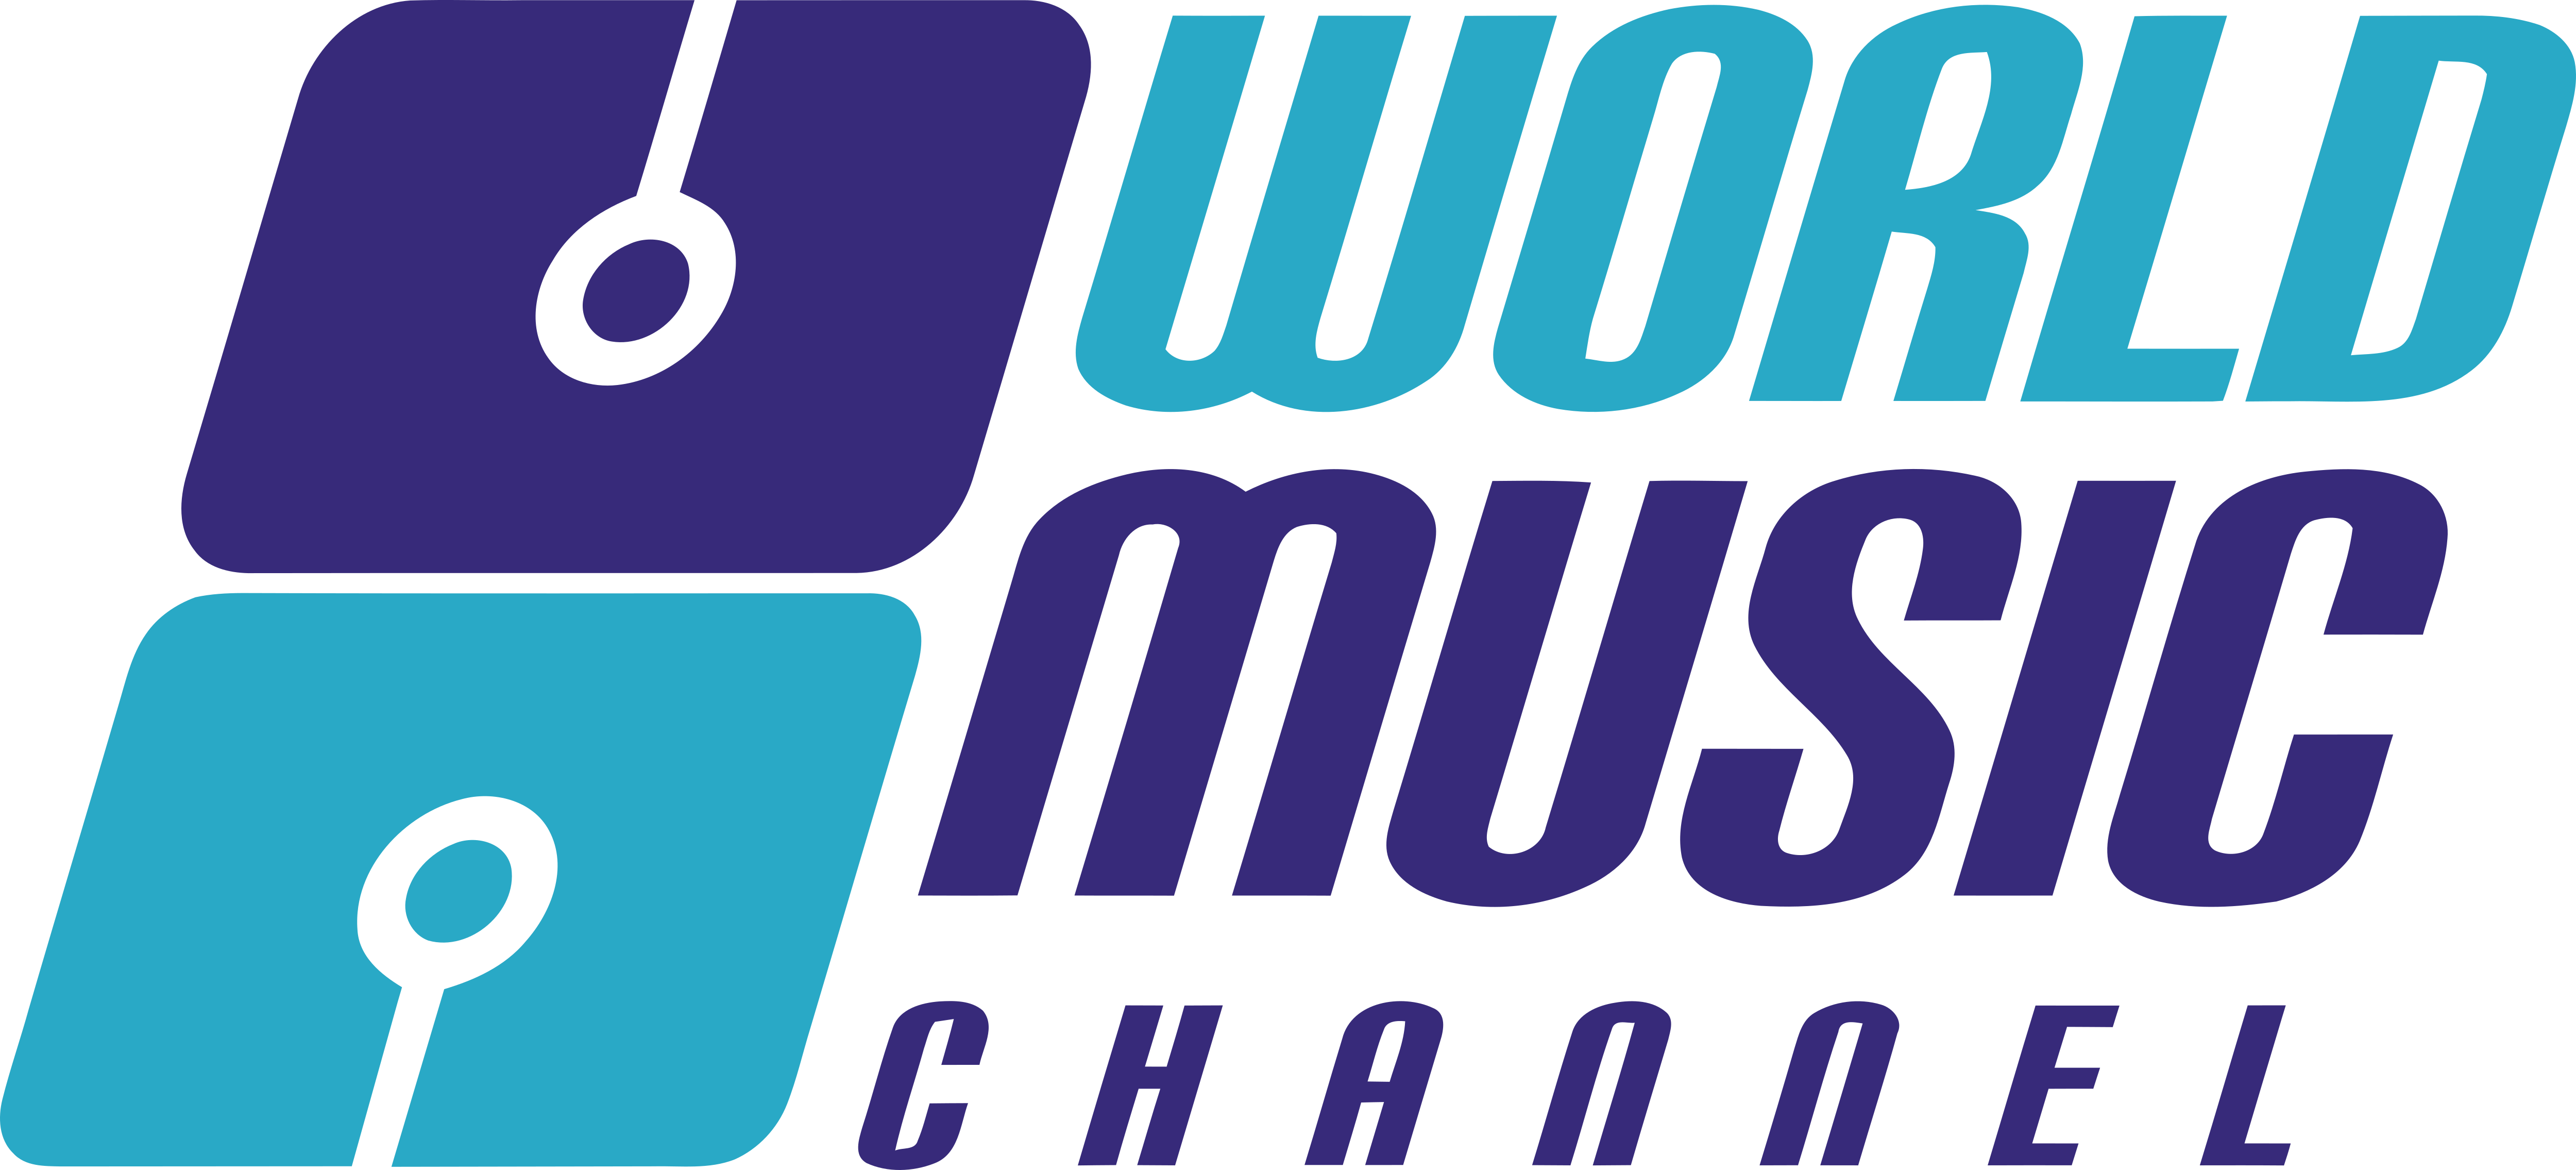 World Music Channel – Logos Download